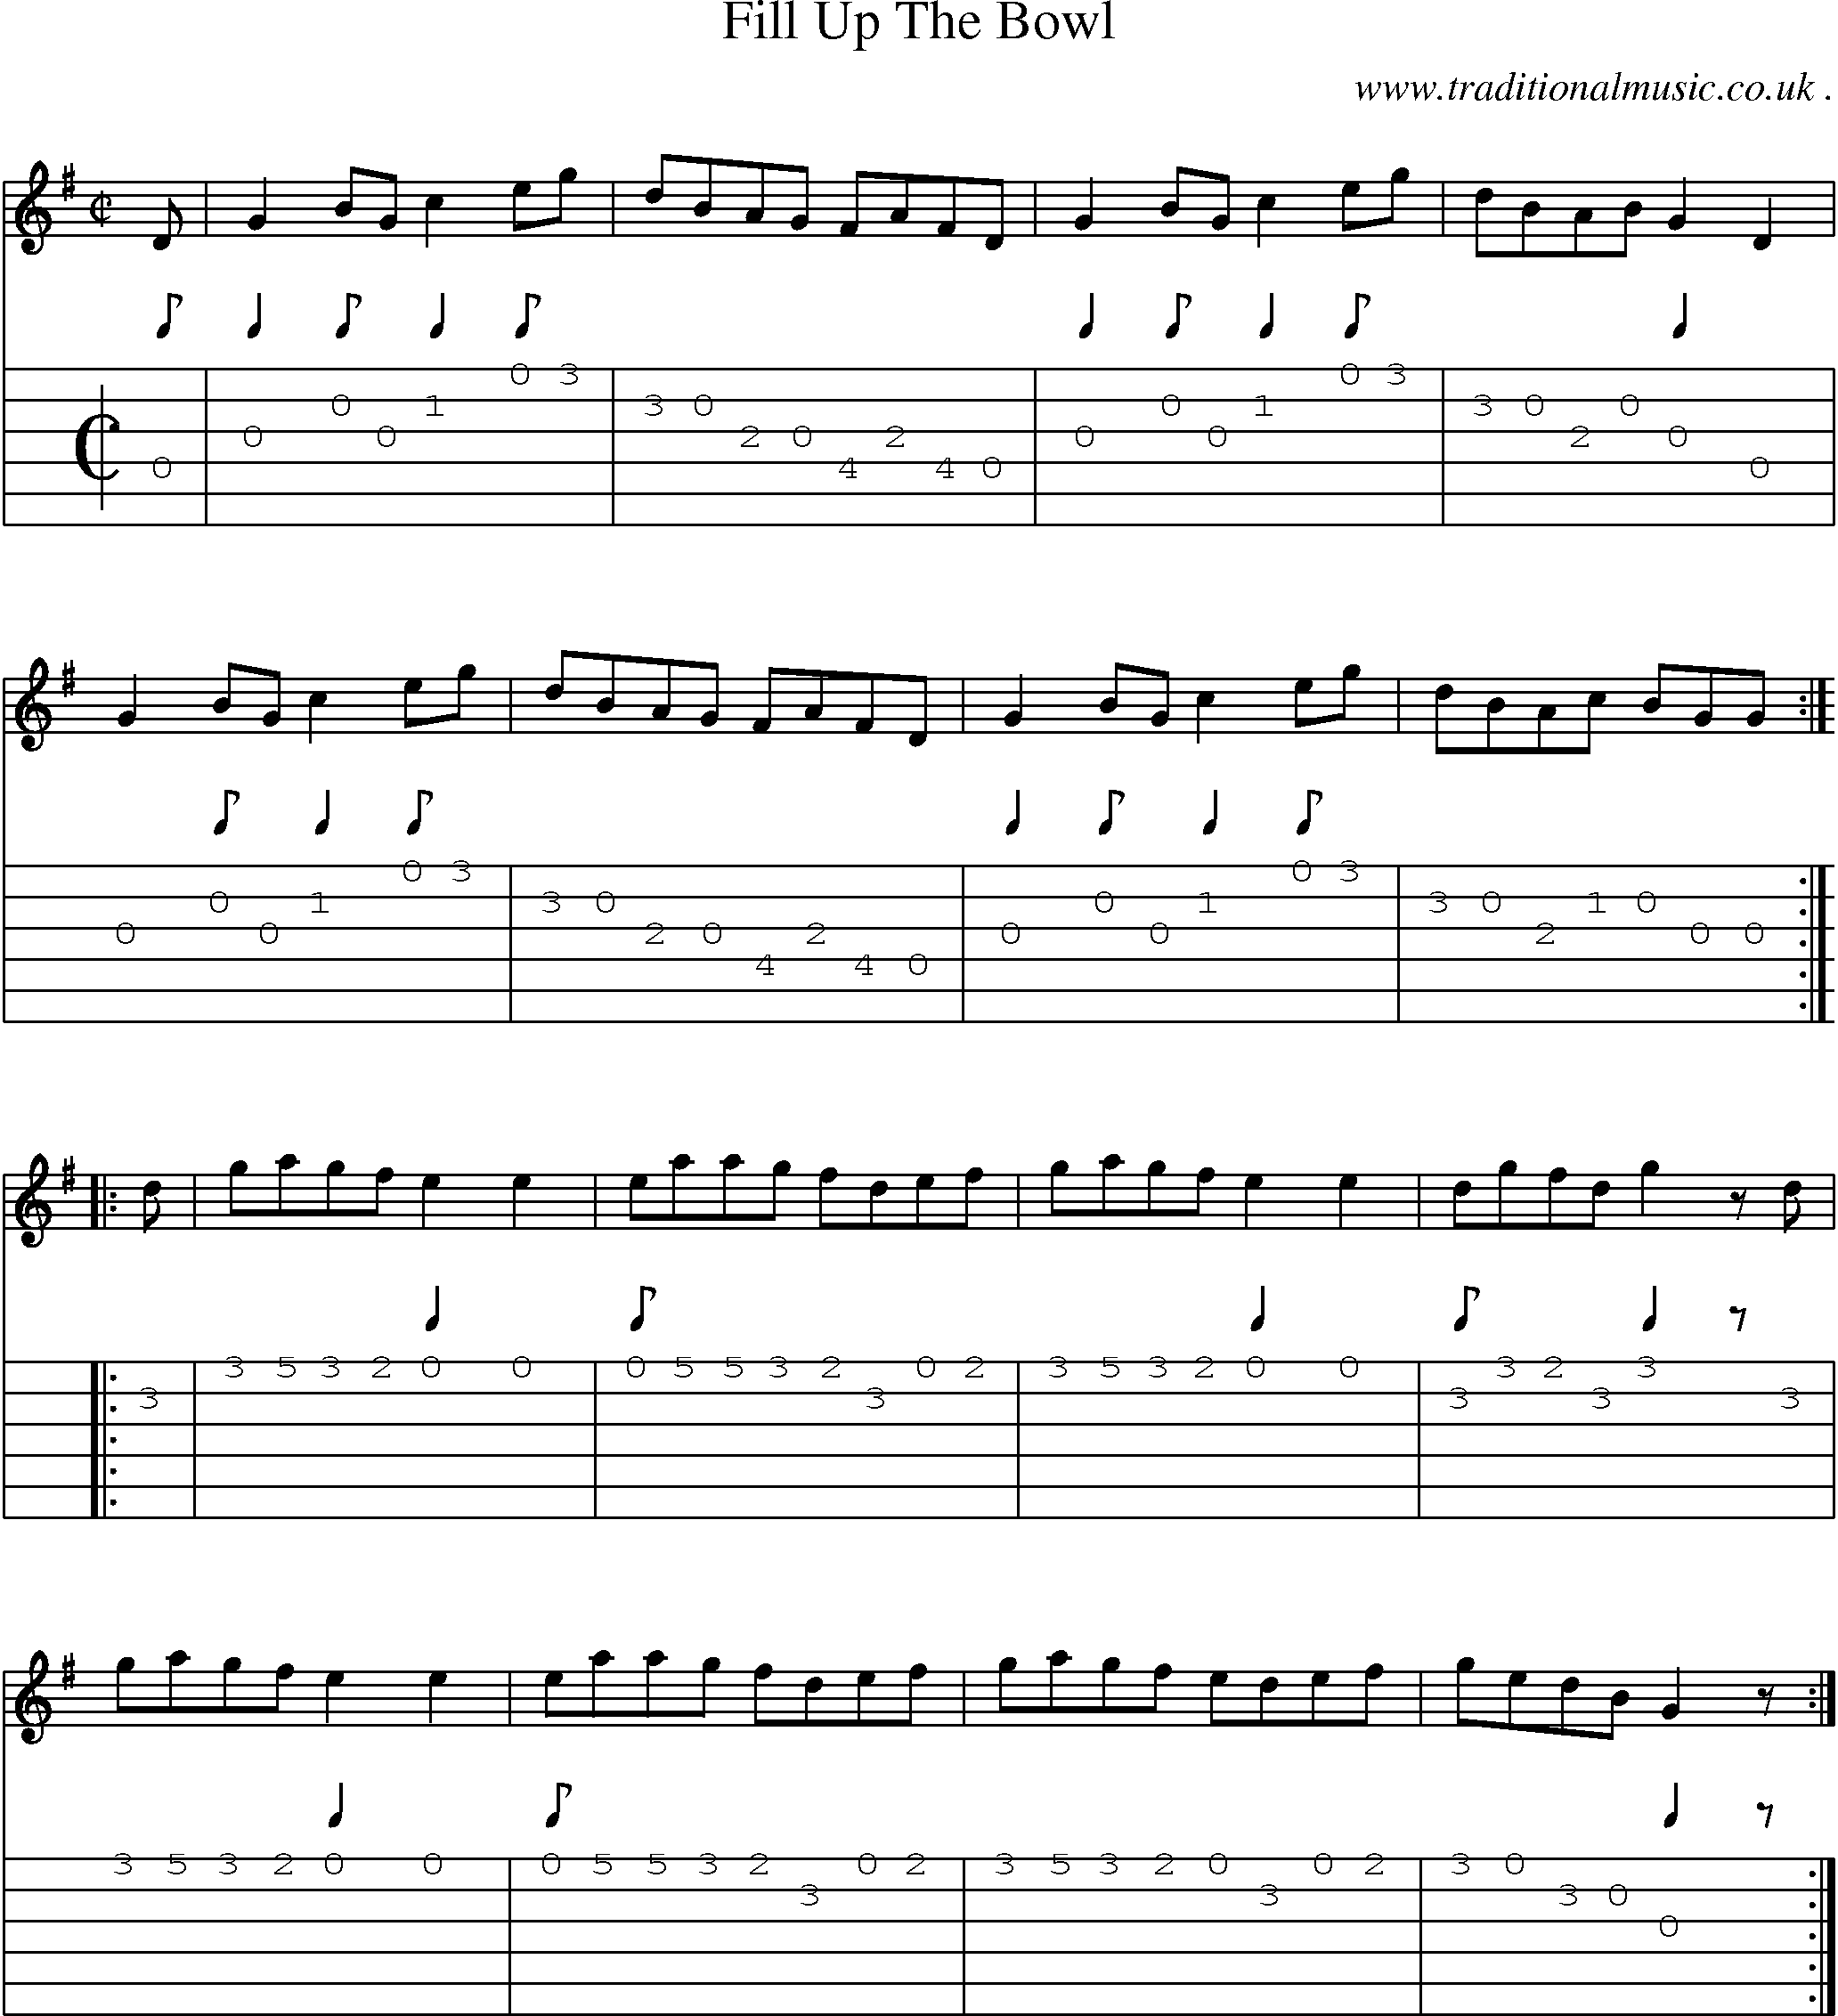 Sheet-Music and Guitar Tabs for Fill Up The Bowl